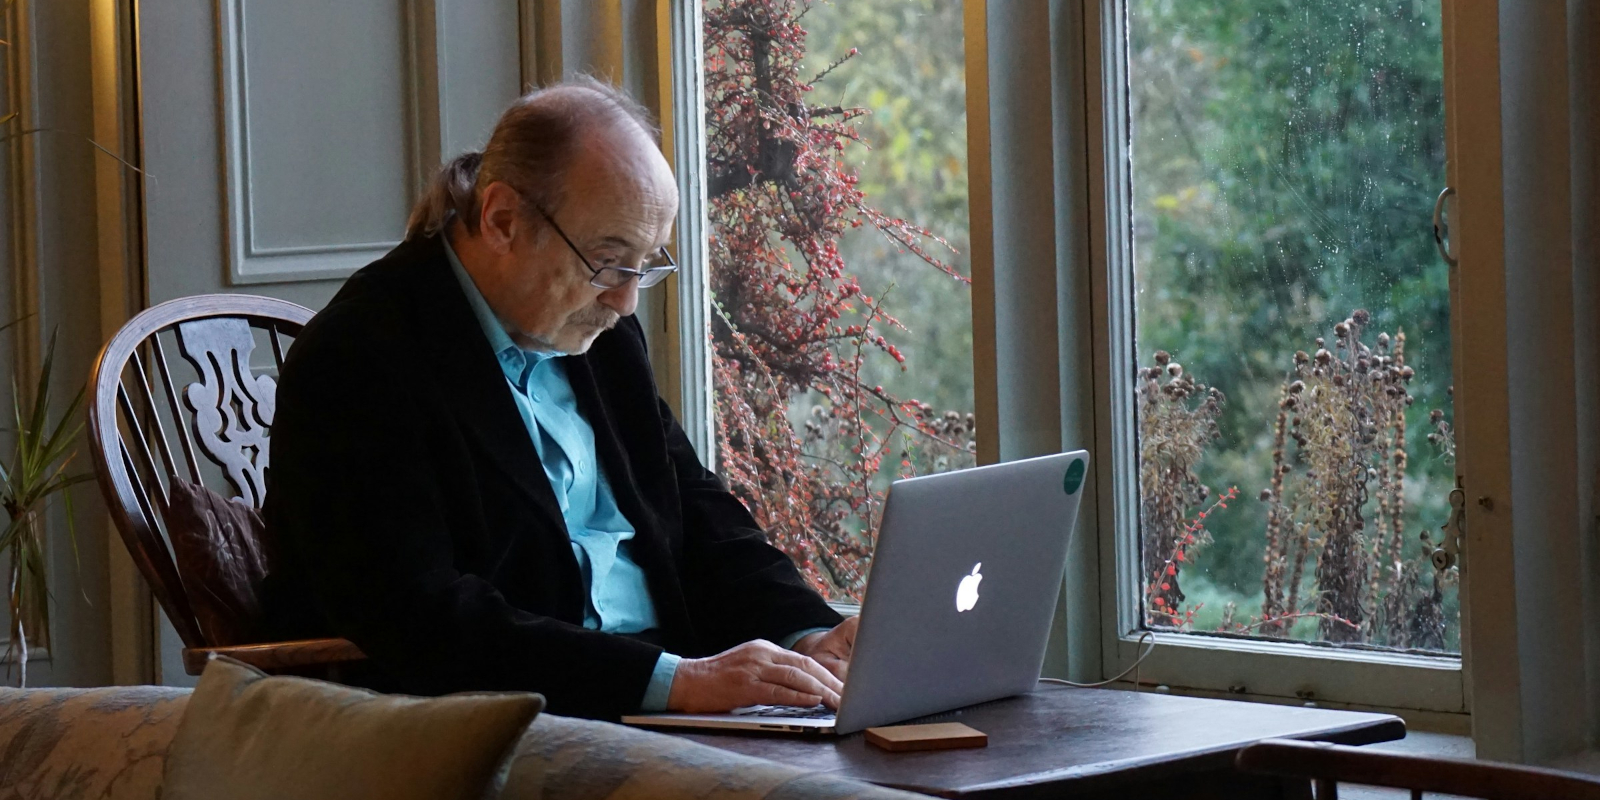 An older man with a ponytail using a laptop in front of a window